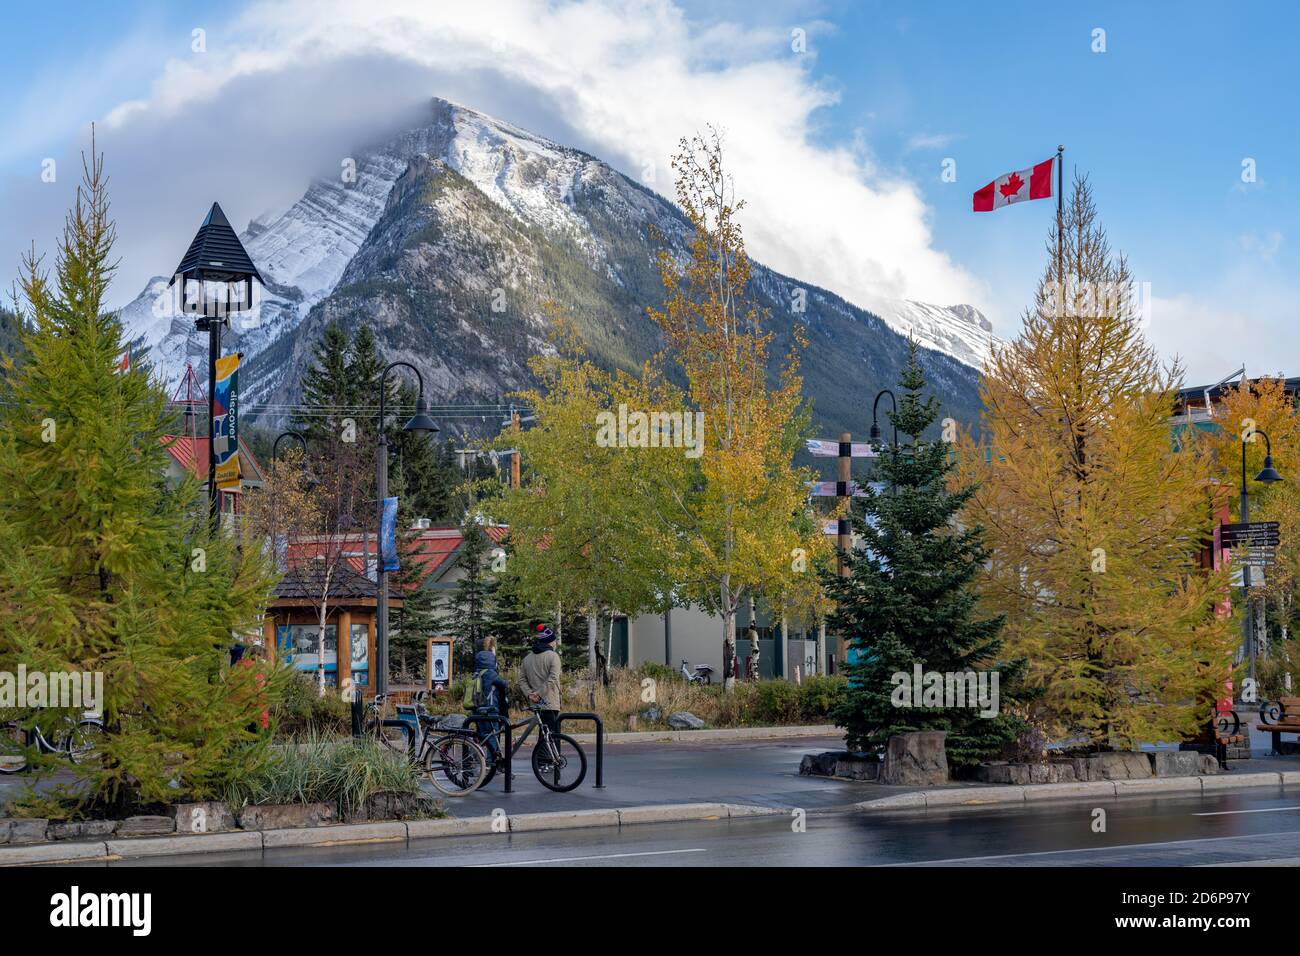 Street view of Banff Avenue in autumn and winter snowy season. Snow Capped Mount Rundle in the background. Banff, Alberta, Canada Stock Photo